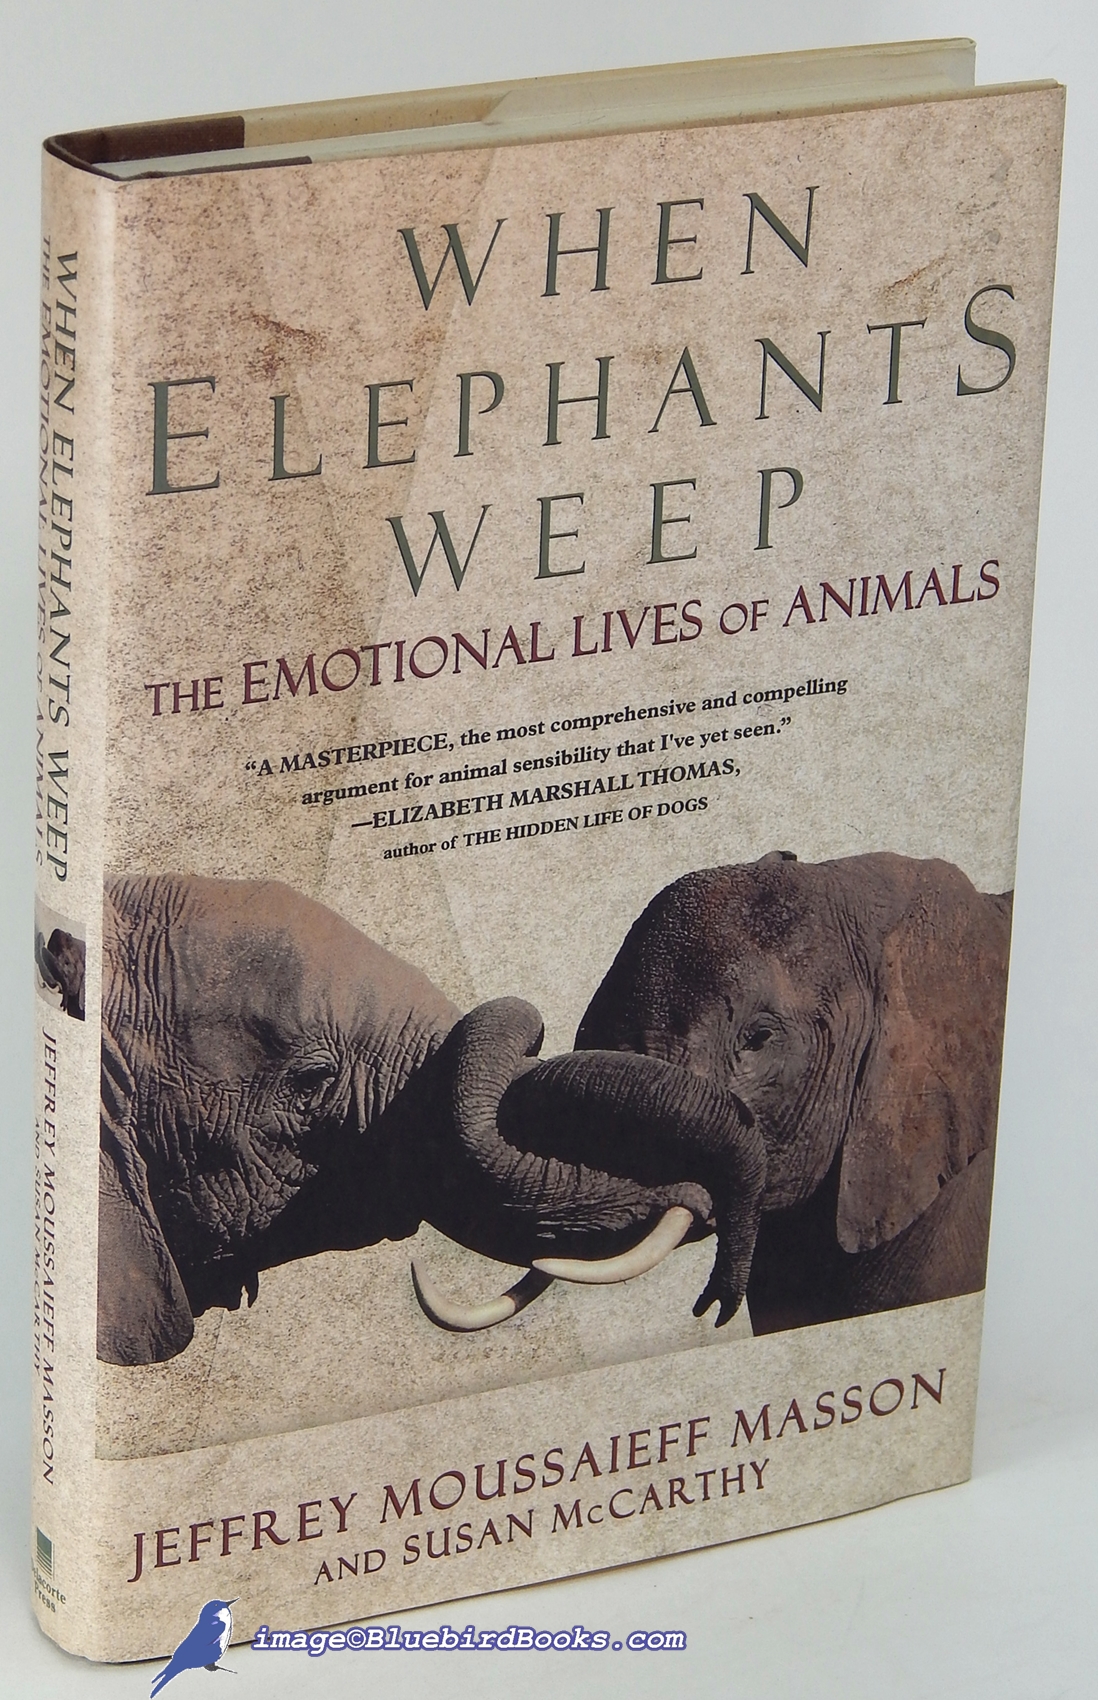 MASSON, JEFFREY MOUSSAIEFF; MCCARTHY, SUSAN - When Elephants Weep: The Emotional Lives of Animals